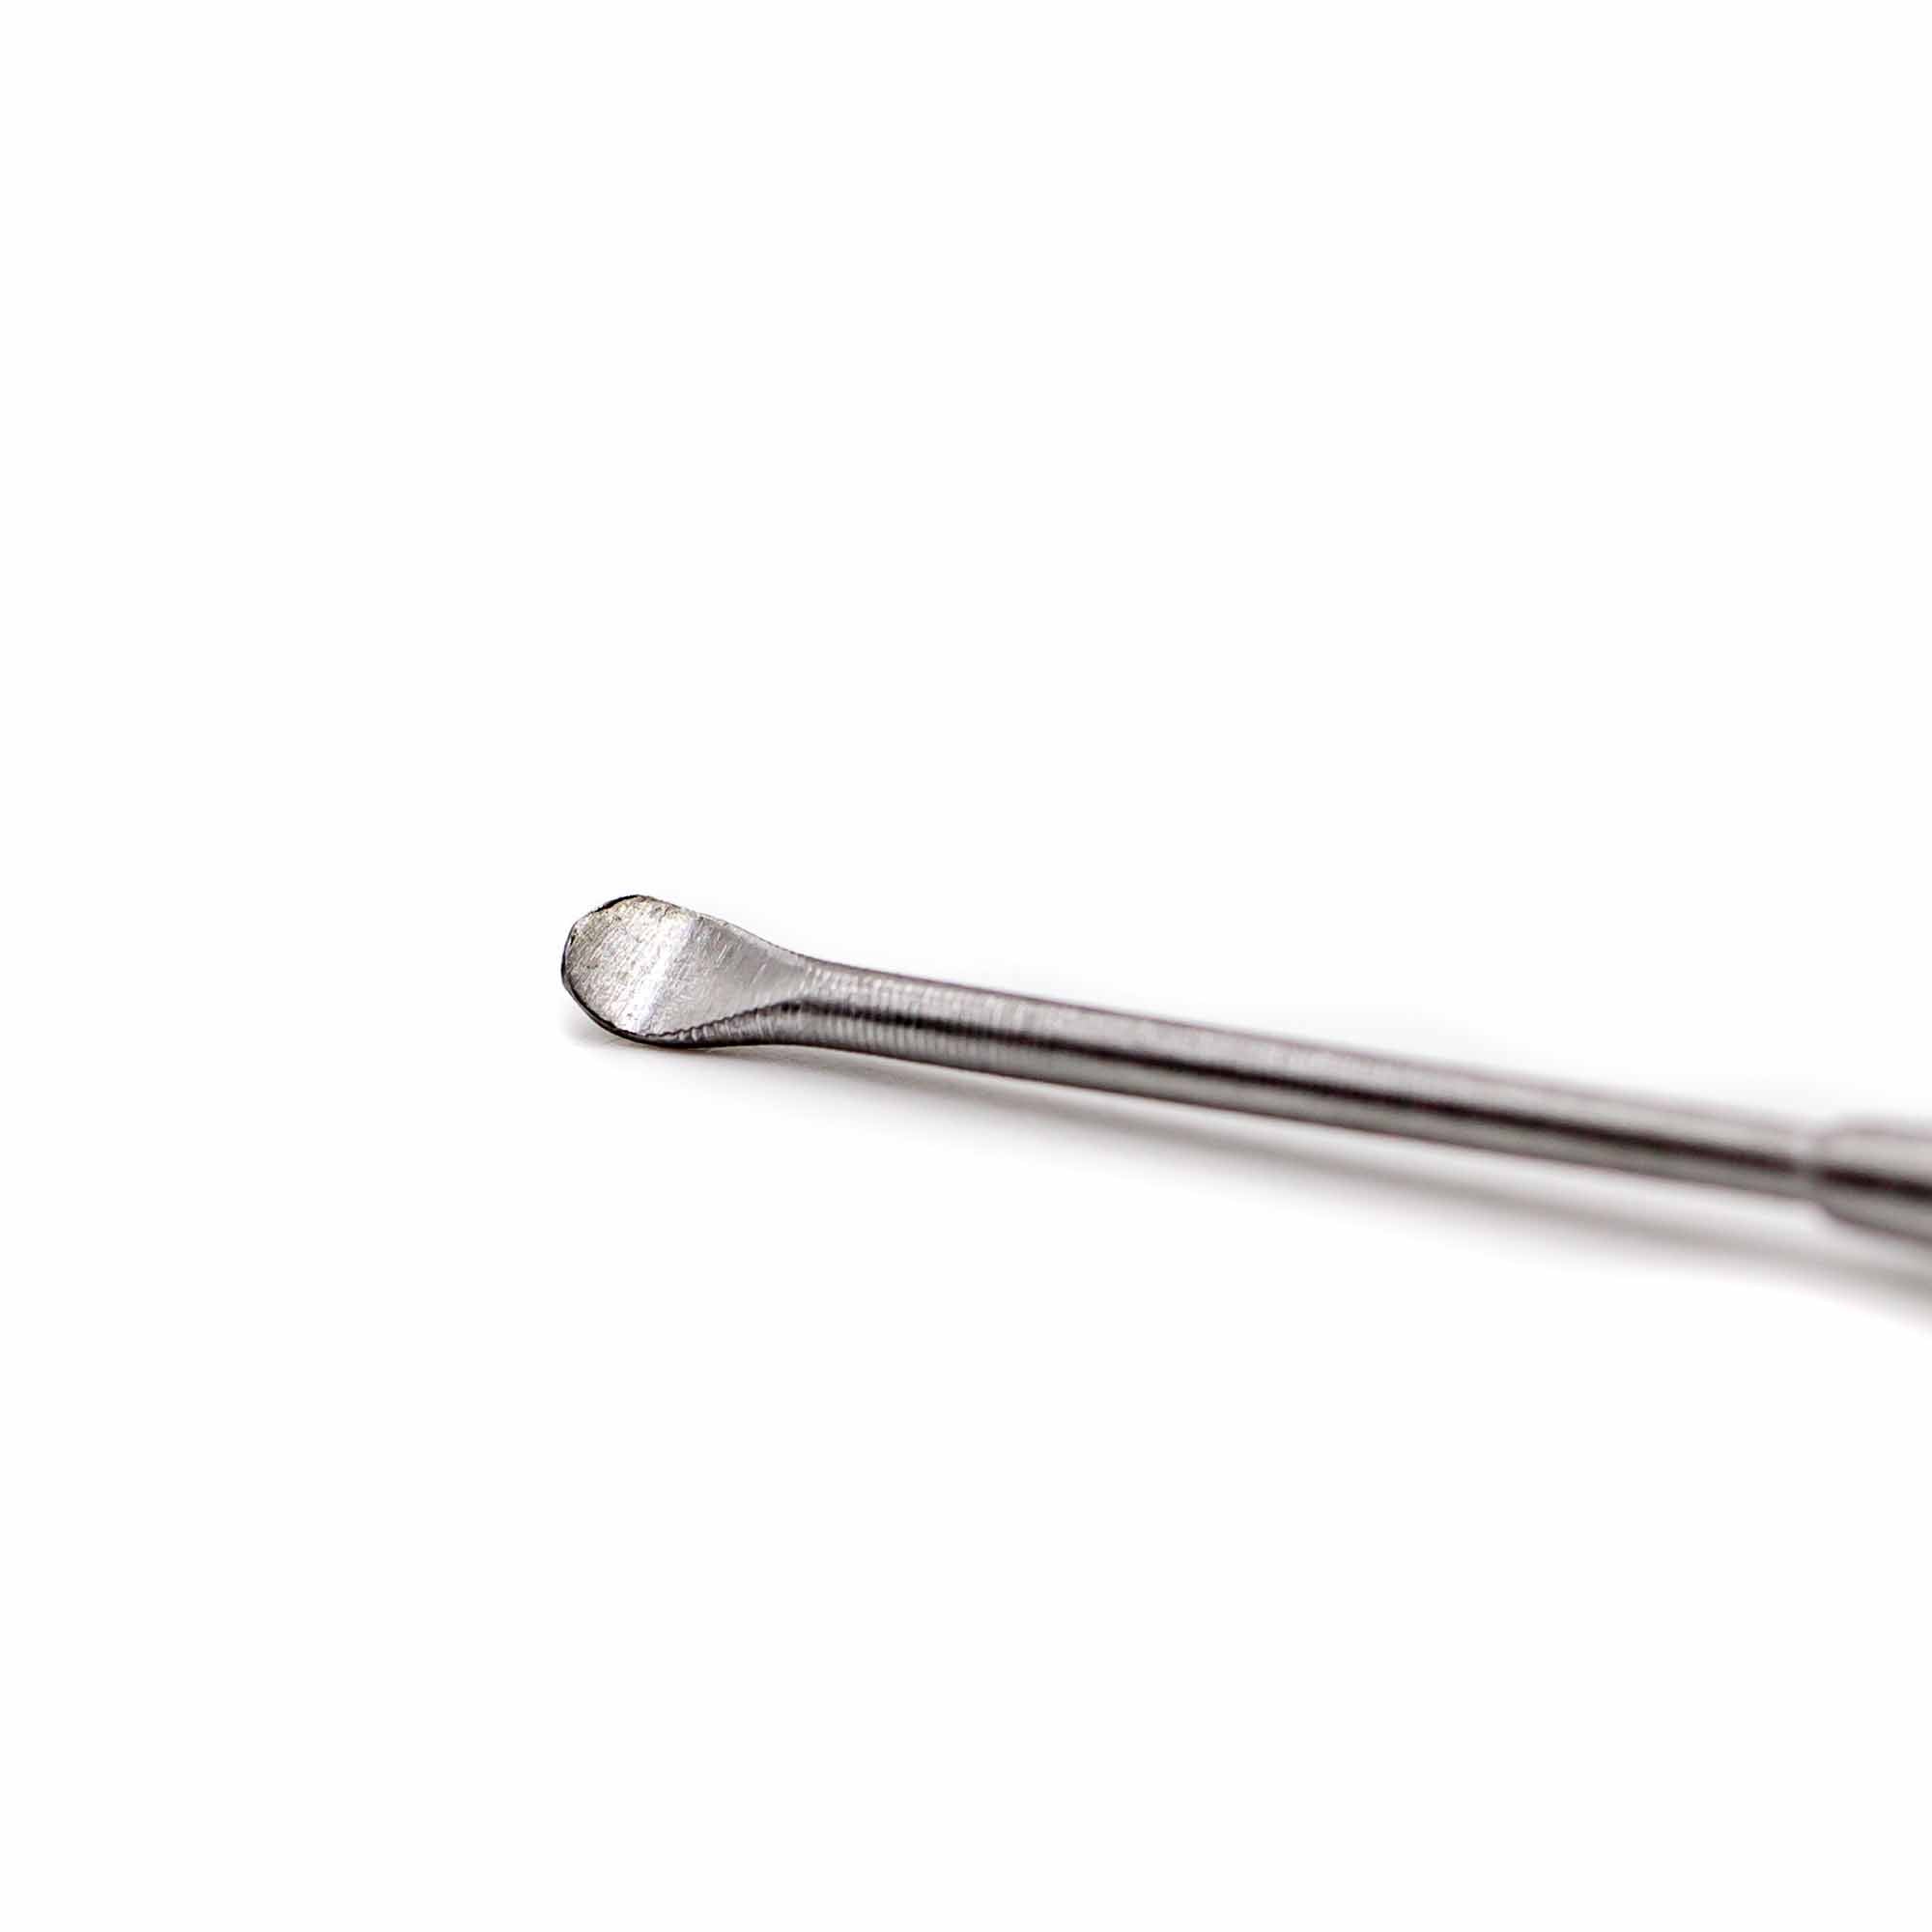 Natural'sace Stainless Steel Ear Pick - Mortise And Tenon